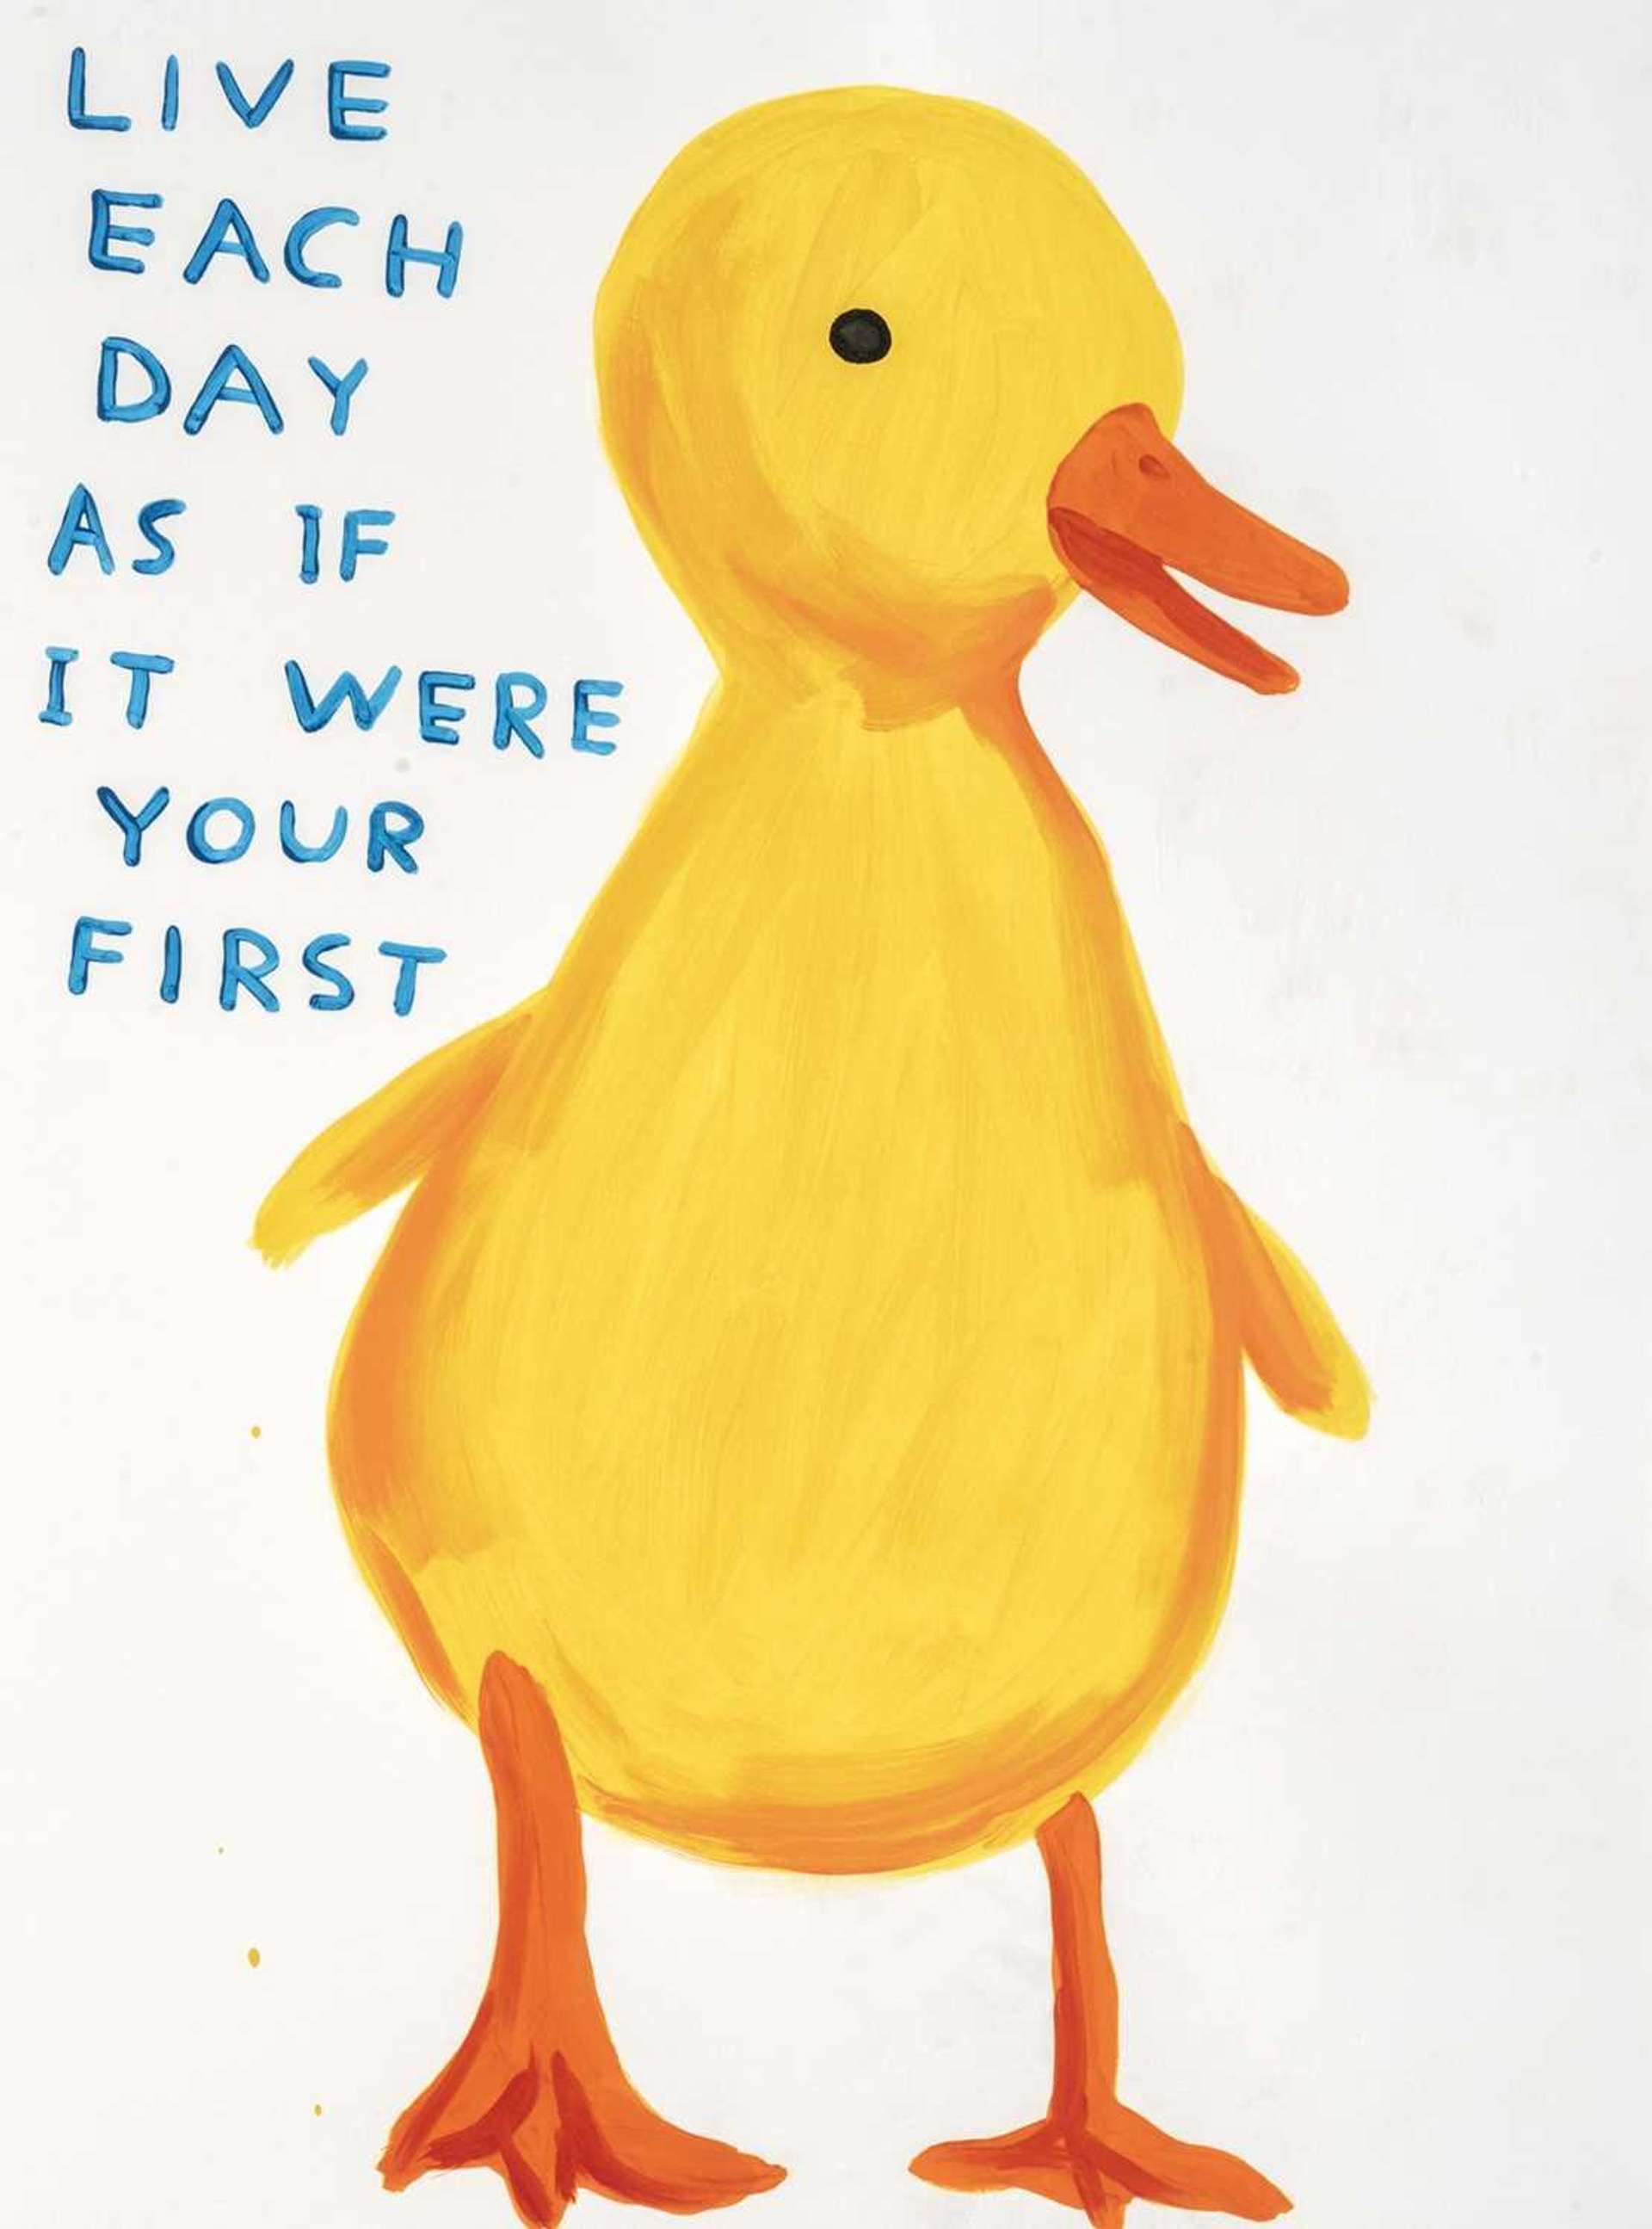 Live Each Day As If It Were Your First - Signed Print by David Shrigley 2022 - MyArtBroker